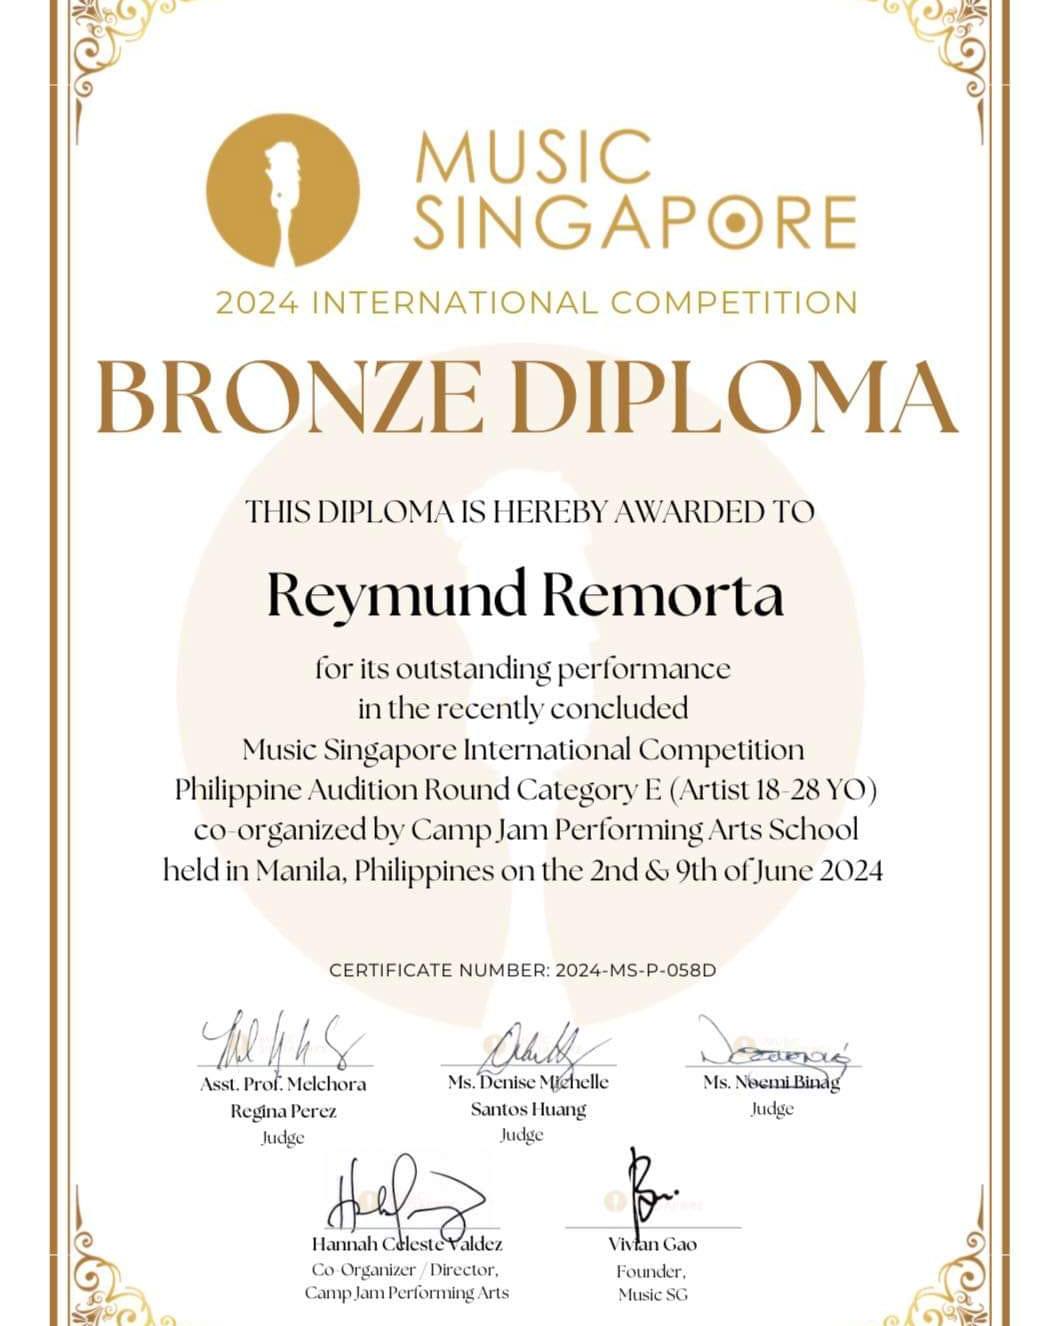 Pride of PLM We warmly and proudly congratulate REYMUND REMORTA Our student from the PLM Department of Music for being the BRONZE DIPLOMA recepient of the first-ever 2024 Music Singapore International Competition Philippine Audition Round. As a recepient, Reymund Remorta  will participate in the Final Round of the competition to be in Singapore on 12-17 August 2024. Kudos to his very talented professor and mentor  Benj Caaway ! From your Barangay PLM Community, congratulations!, and our best wishes and prayers.